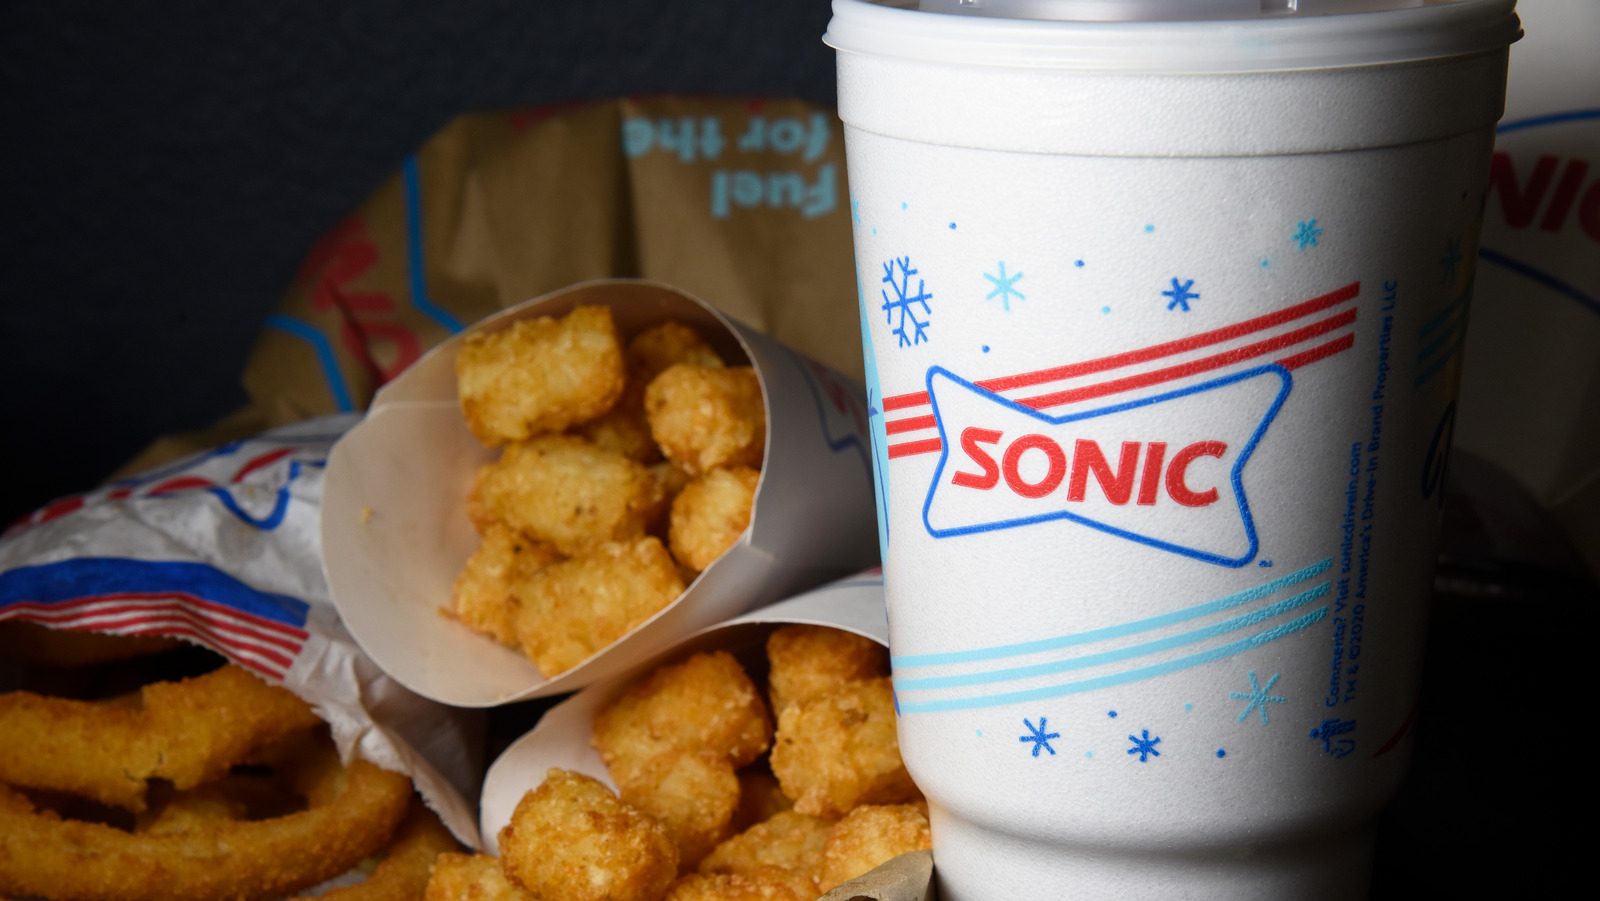 Sonic's New Shake Flavors Are Inspired By Baked Goods